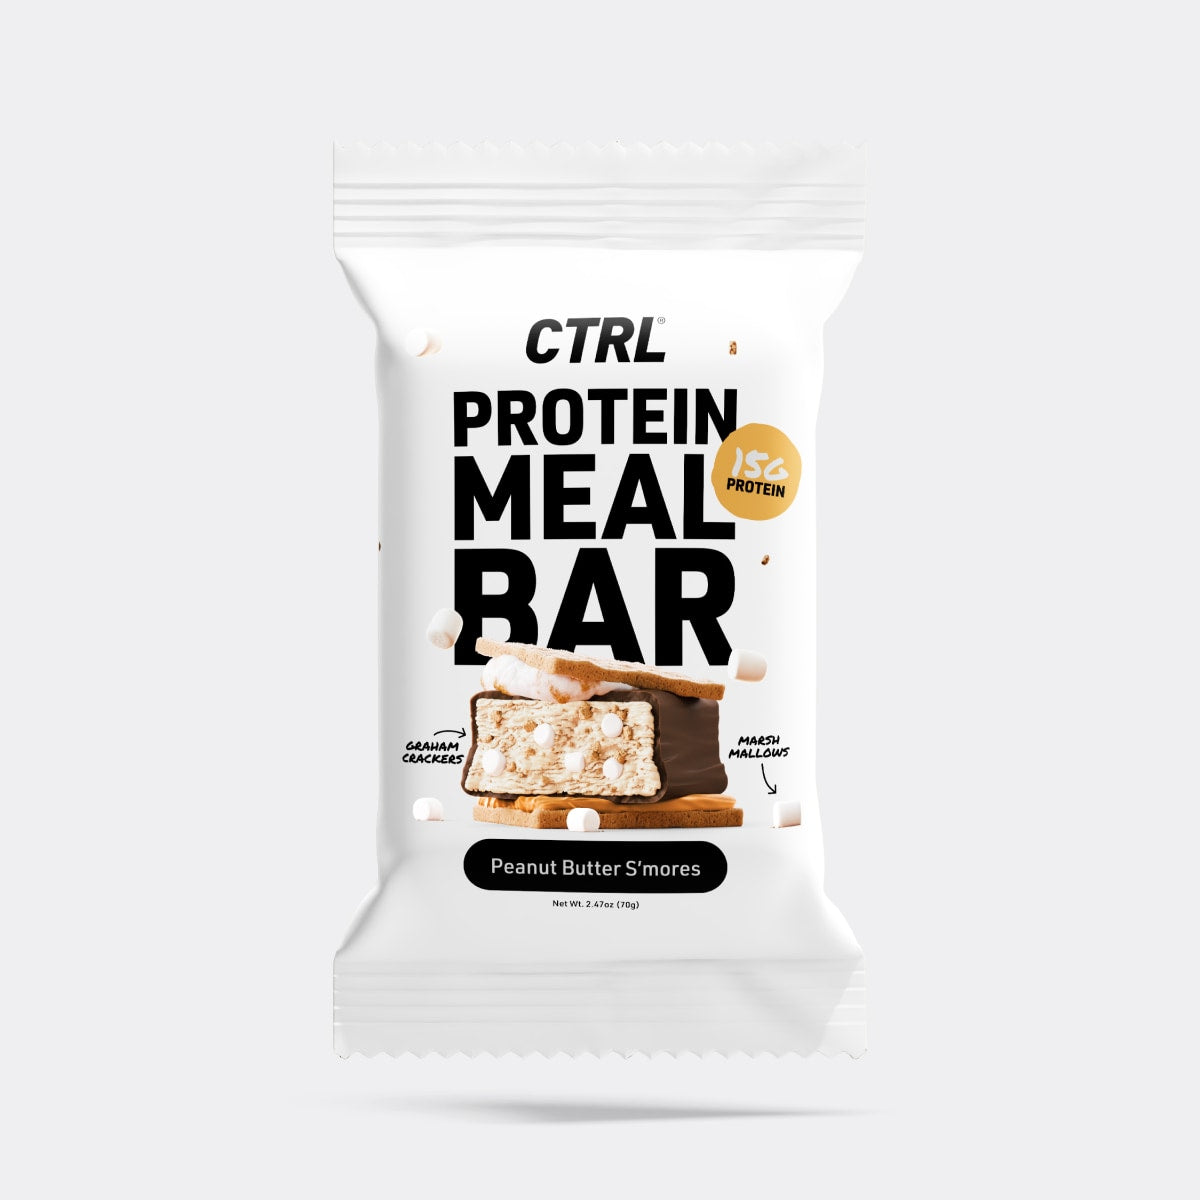 Peanut Butter S'mores - Protein Meal Bar (1 Bar)